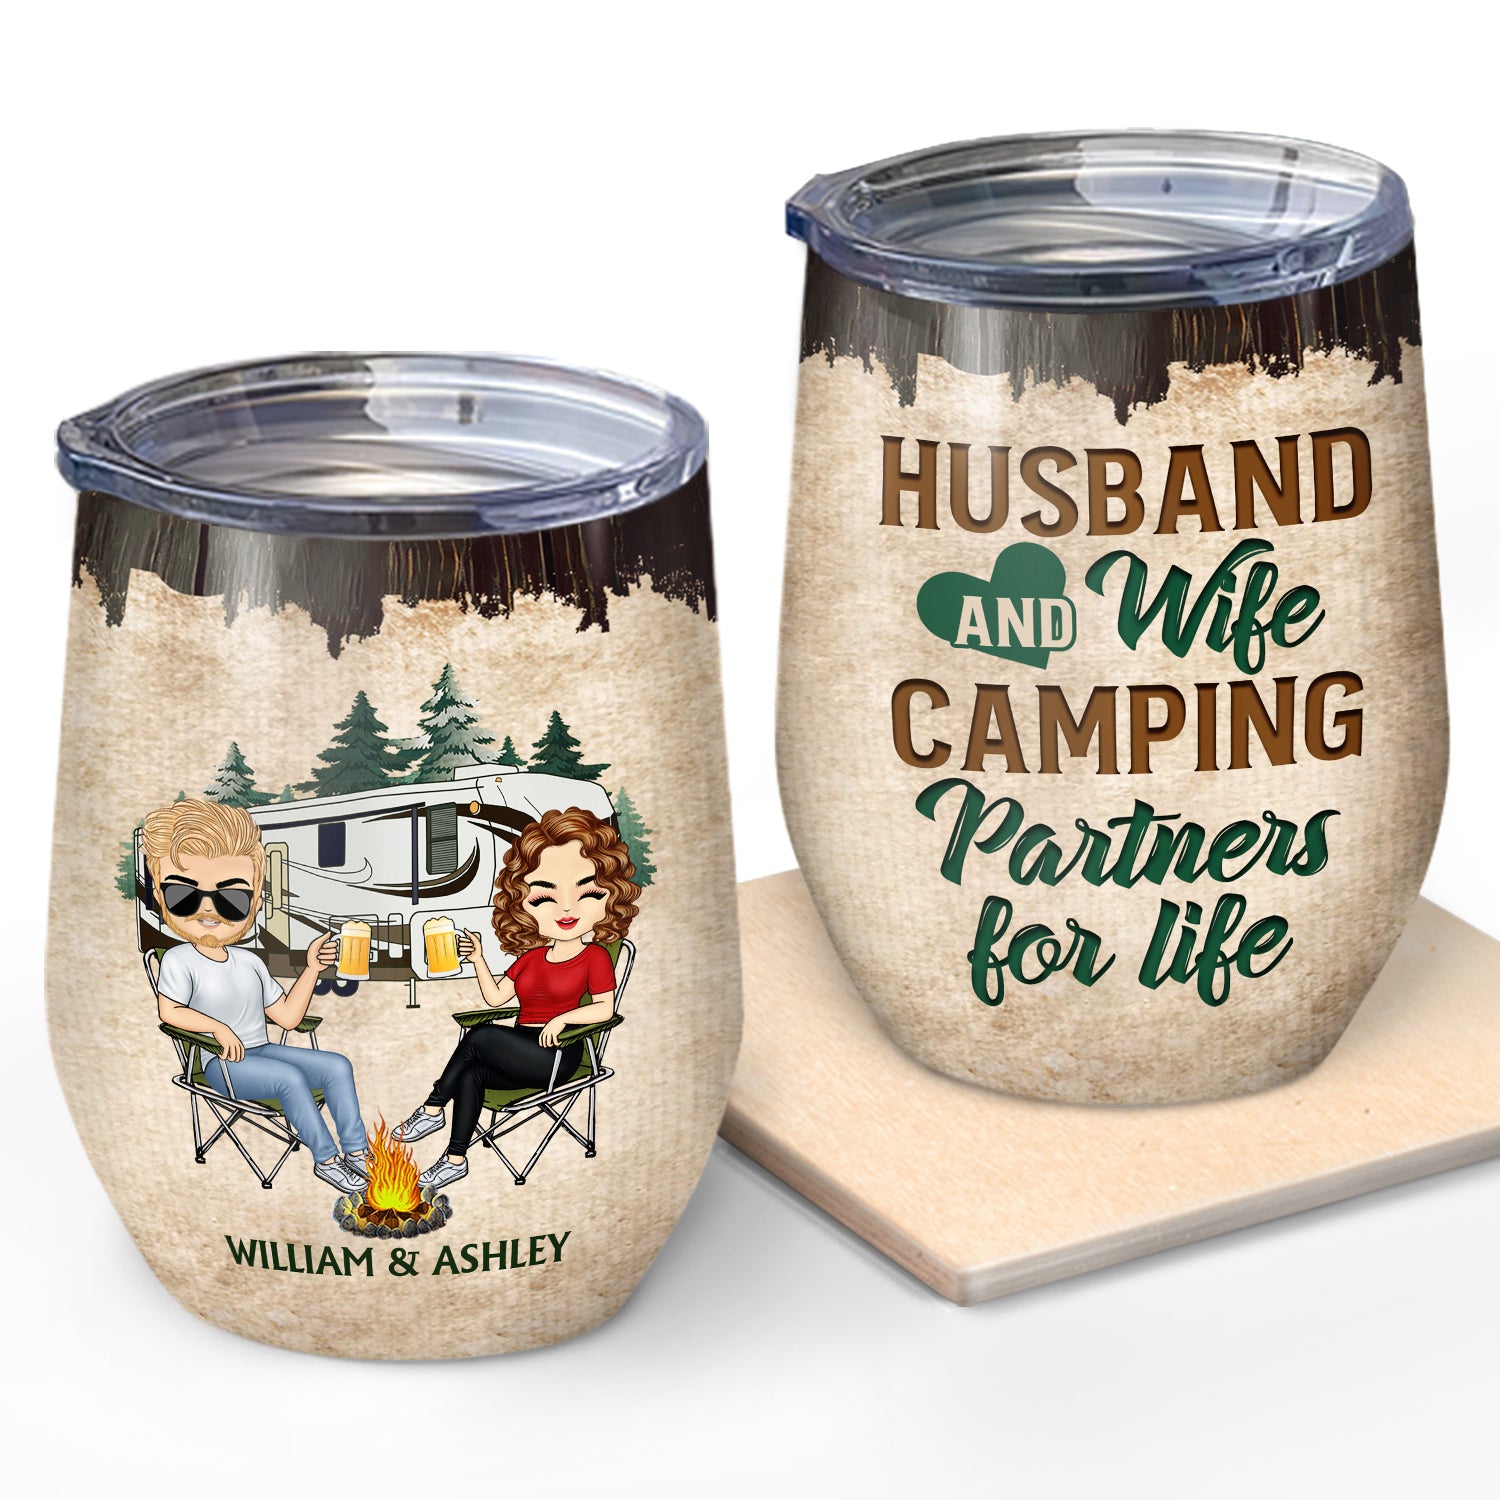 Husband And Wife Camping Partners For Life - Anniversary, Birthday Gift For Spouse, Husband, Wife, Boyfriend, Girlfriend, Campers - Personalized Custom Wine Tumbler